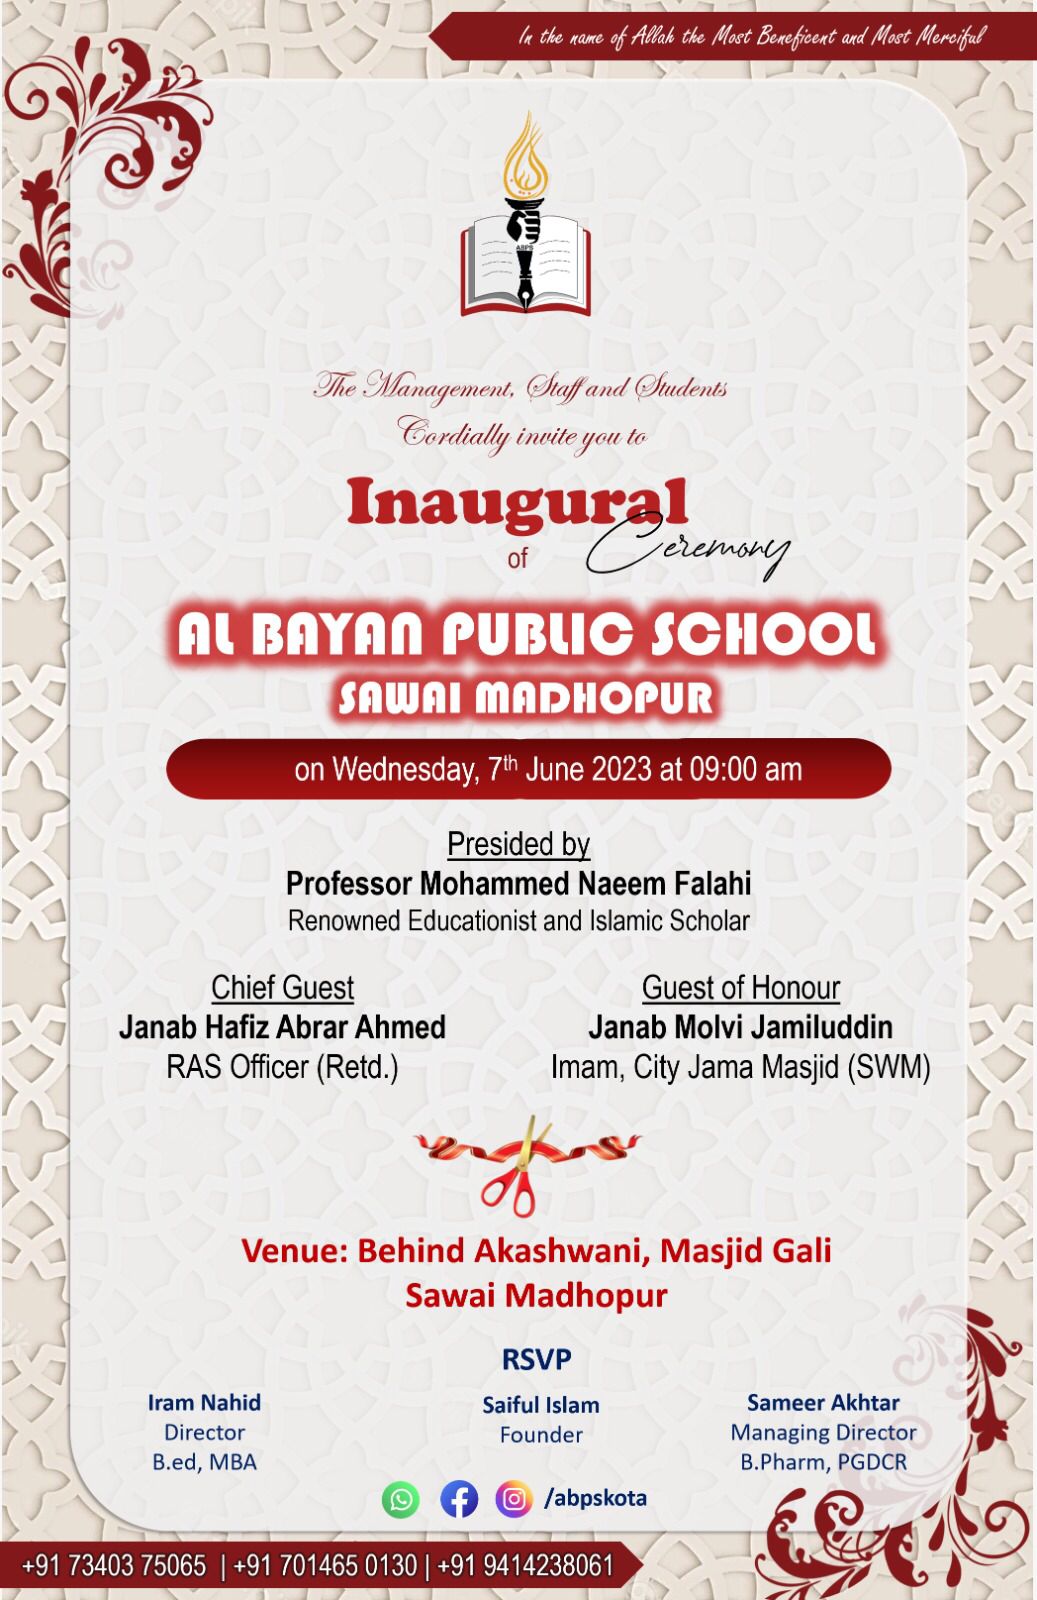 The Management, staff and students cordially invites you to Inaugural of Ceremony AL Bayan Public School, Sawai Madhopur